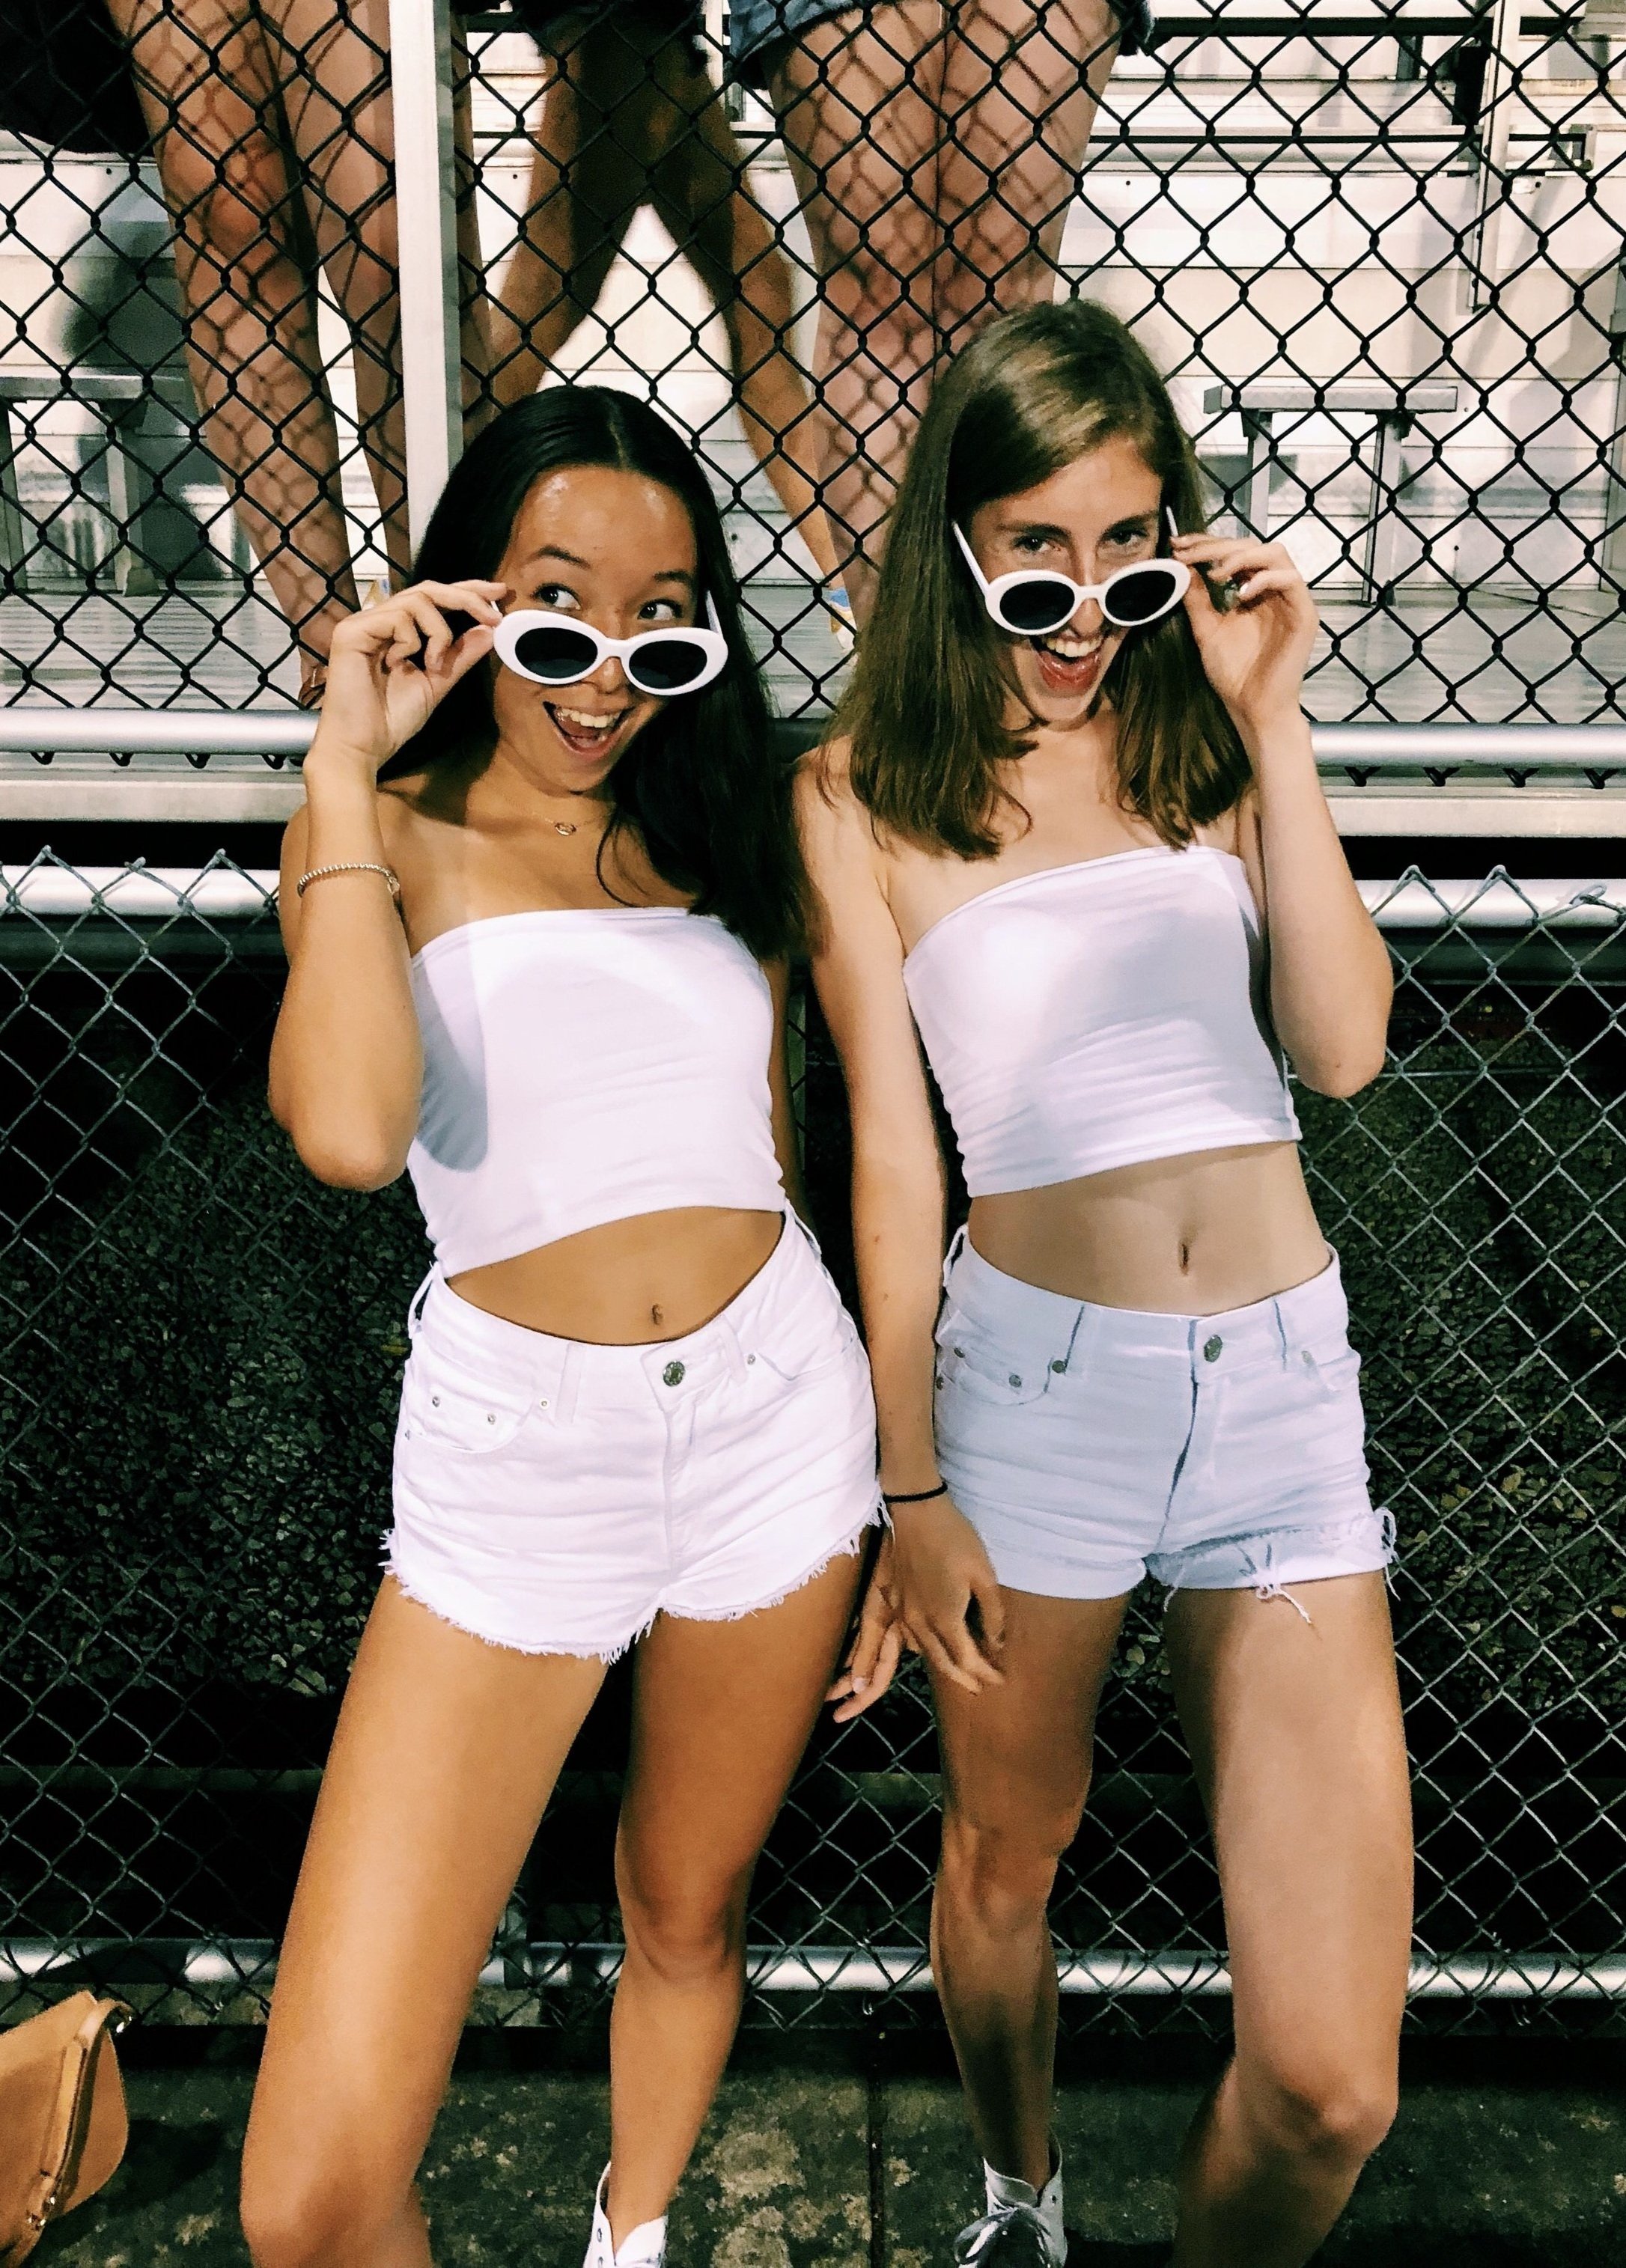 20 Super Cute White Out Outfit Ideas For Game Day! — Nikki Lo